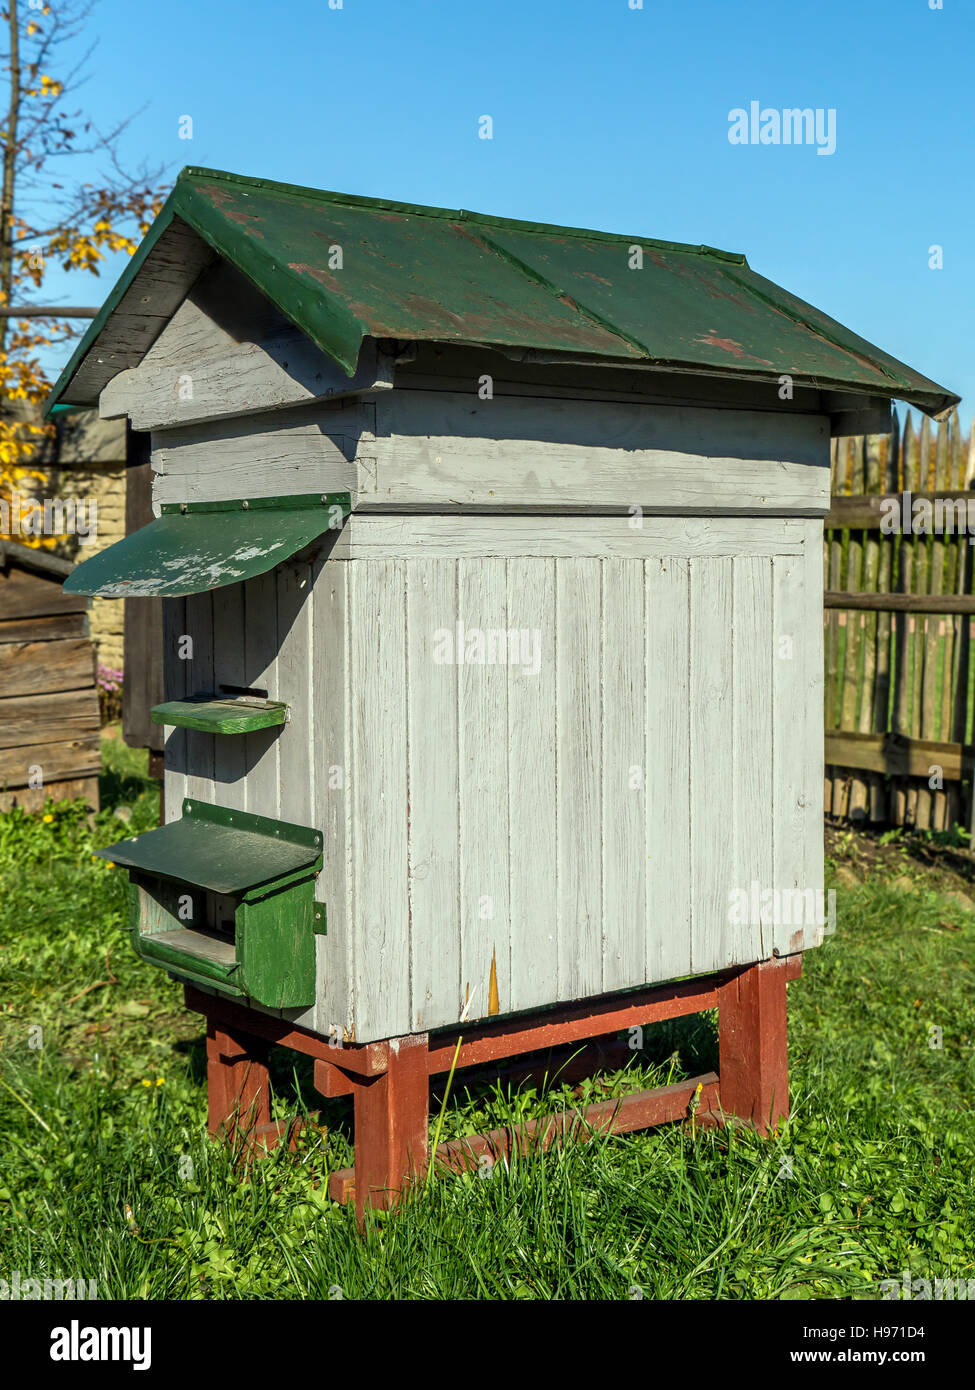 Old wooden bee hive in the garden Stock Photo